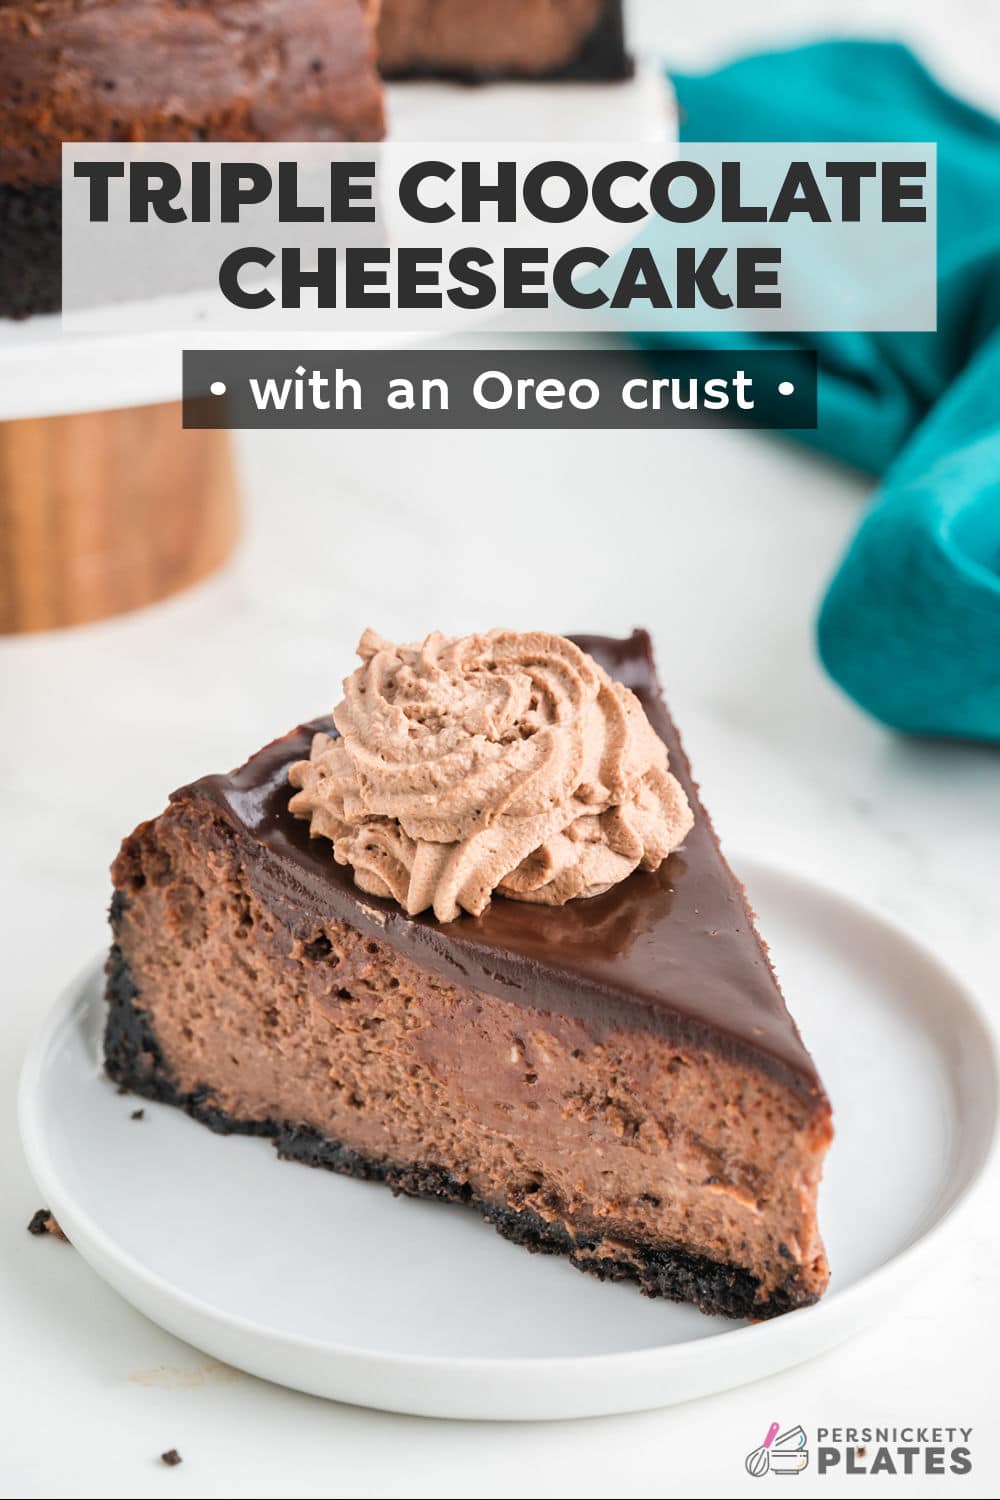 Chocolate lovers, this one is for you! Every inch of this triple chocolate cheesecake is filled with chocolatey goodness, including an Oreo crust. The entire cheesecake is prepared and baked in just over 1 hour with no water bath needed! | www.persnicketyplates.com